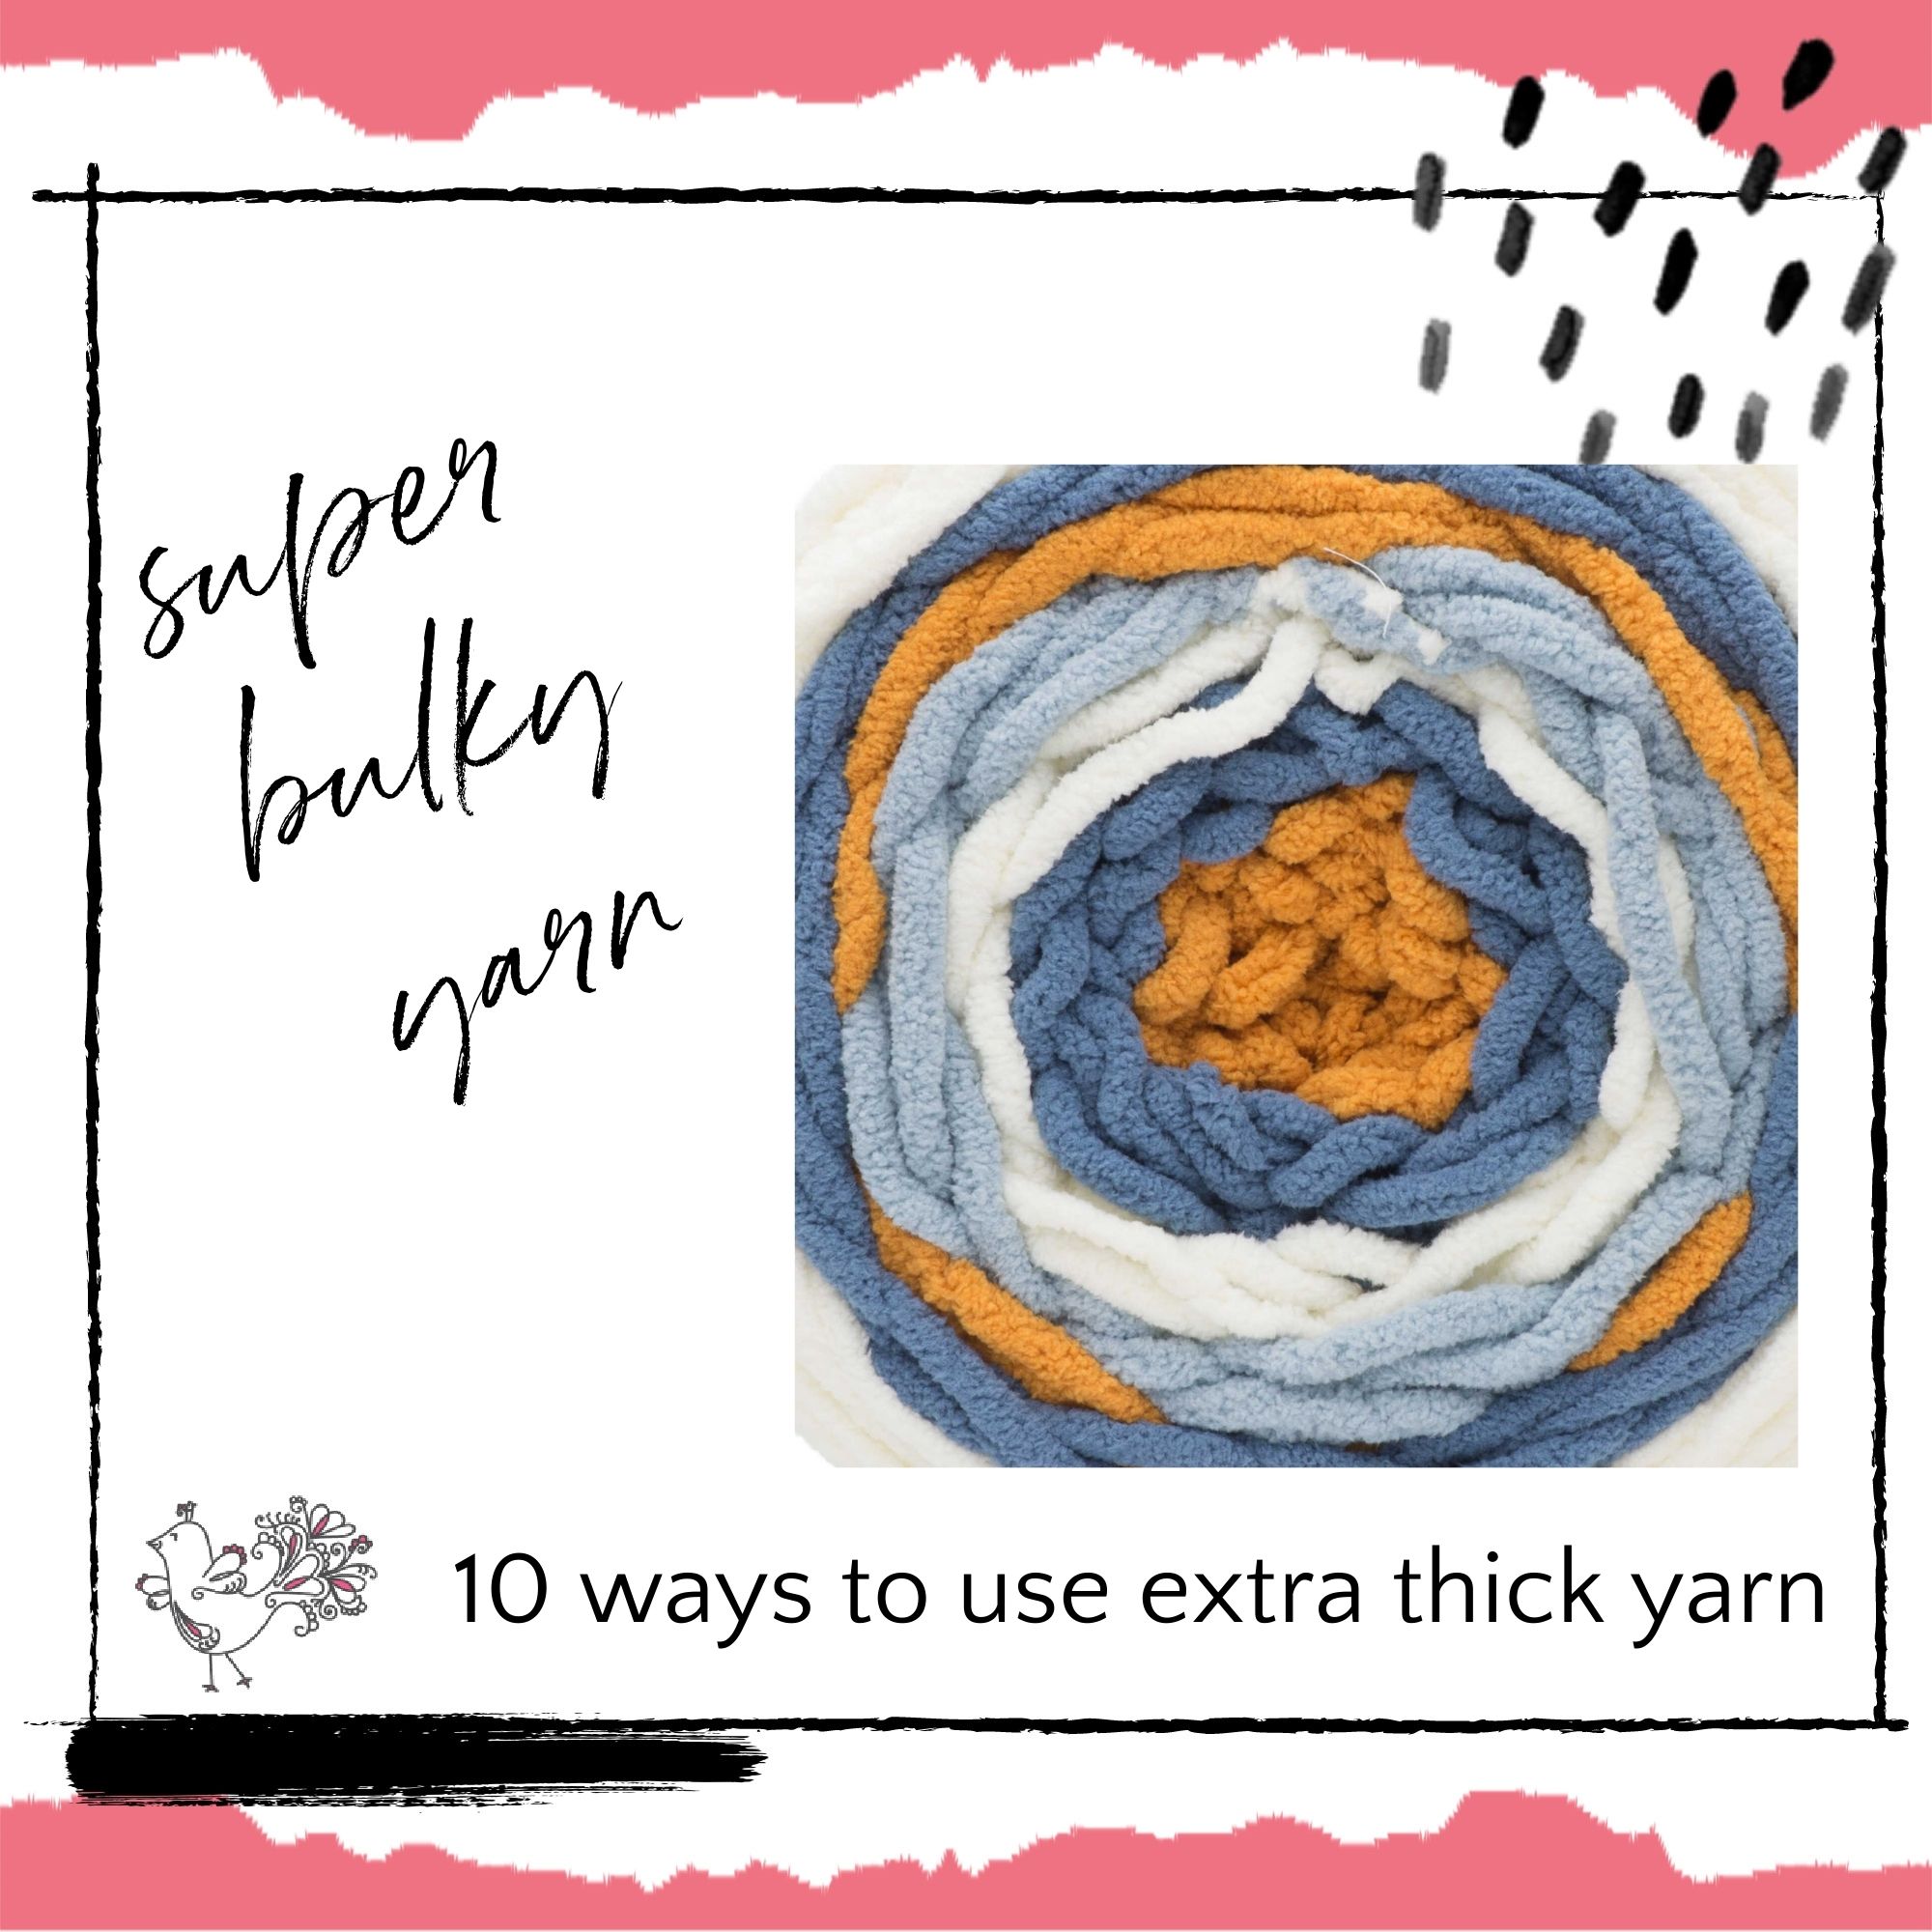 https://marlybird.com/wp-content/uploads/2017/12/how-to-use-super-bulky-yarn.jpg